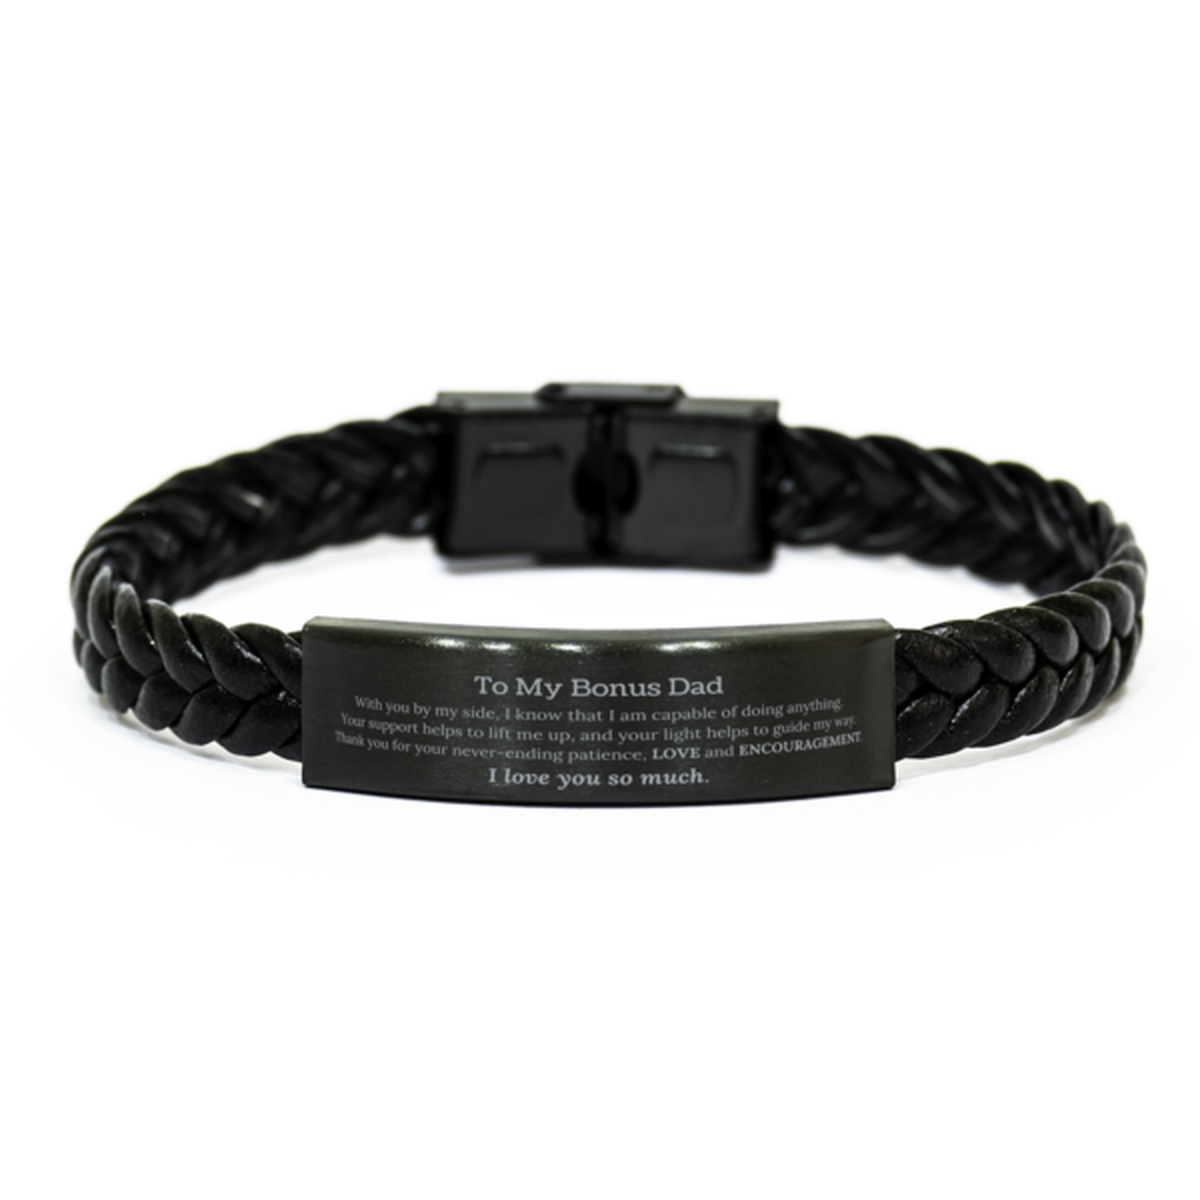 Appreciation Bonus Dad Braided Leather Bracelet Gifts, To My Bonus Dad Birthday Christmas Wedding Keepsake Gifts for Bonus Dad With you by my side, I know that I am capable of doing anything. I love you so much